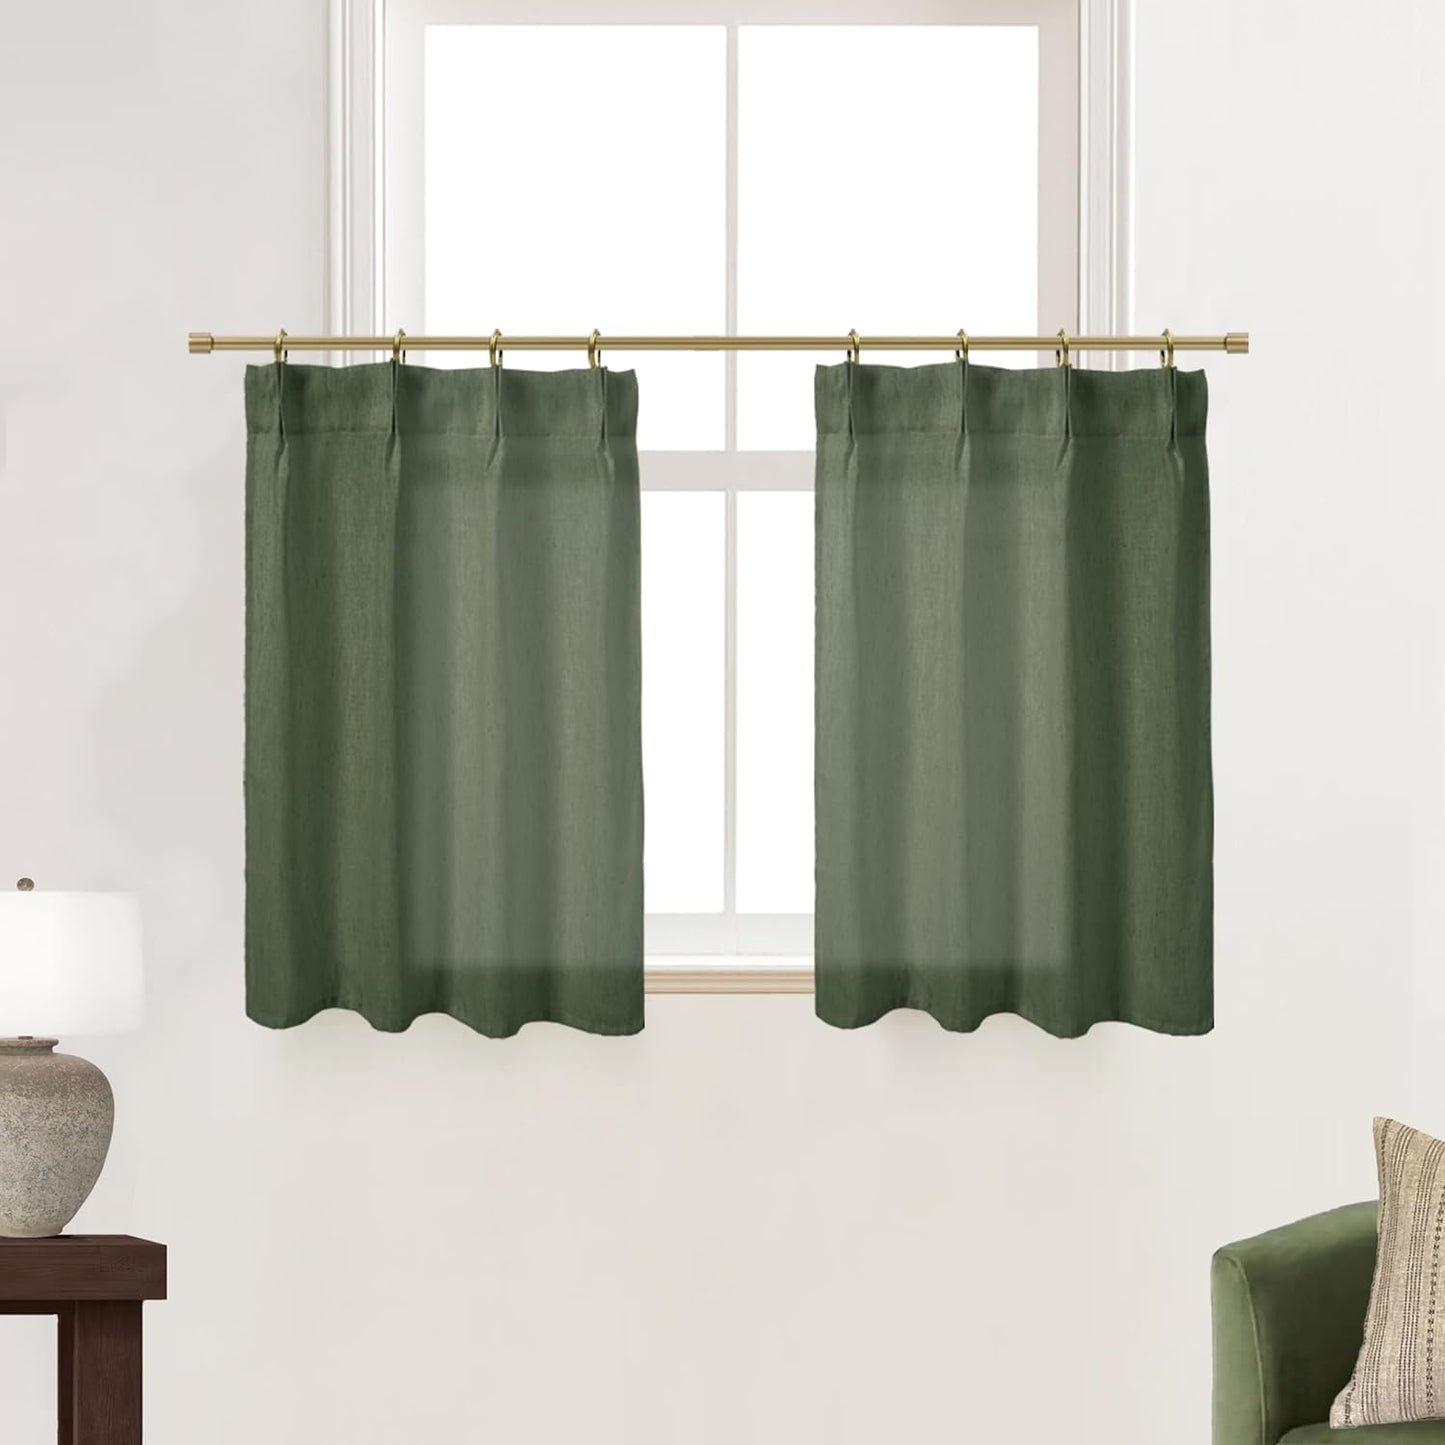 Short Curtains for Windows,Semi Sheer White Linen Cotton Privacy Light Filtering Cafe Length Small Pinch Pleated Curtains for Living Room Bathroom with Hooks,24 X 24 Inch Long  Lino Rosa Olive Green 24"W X 24"L 